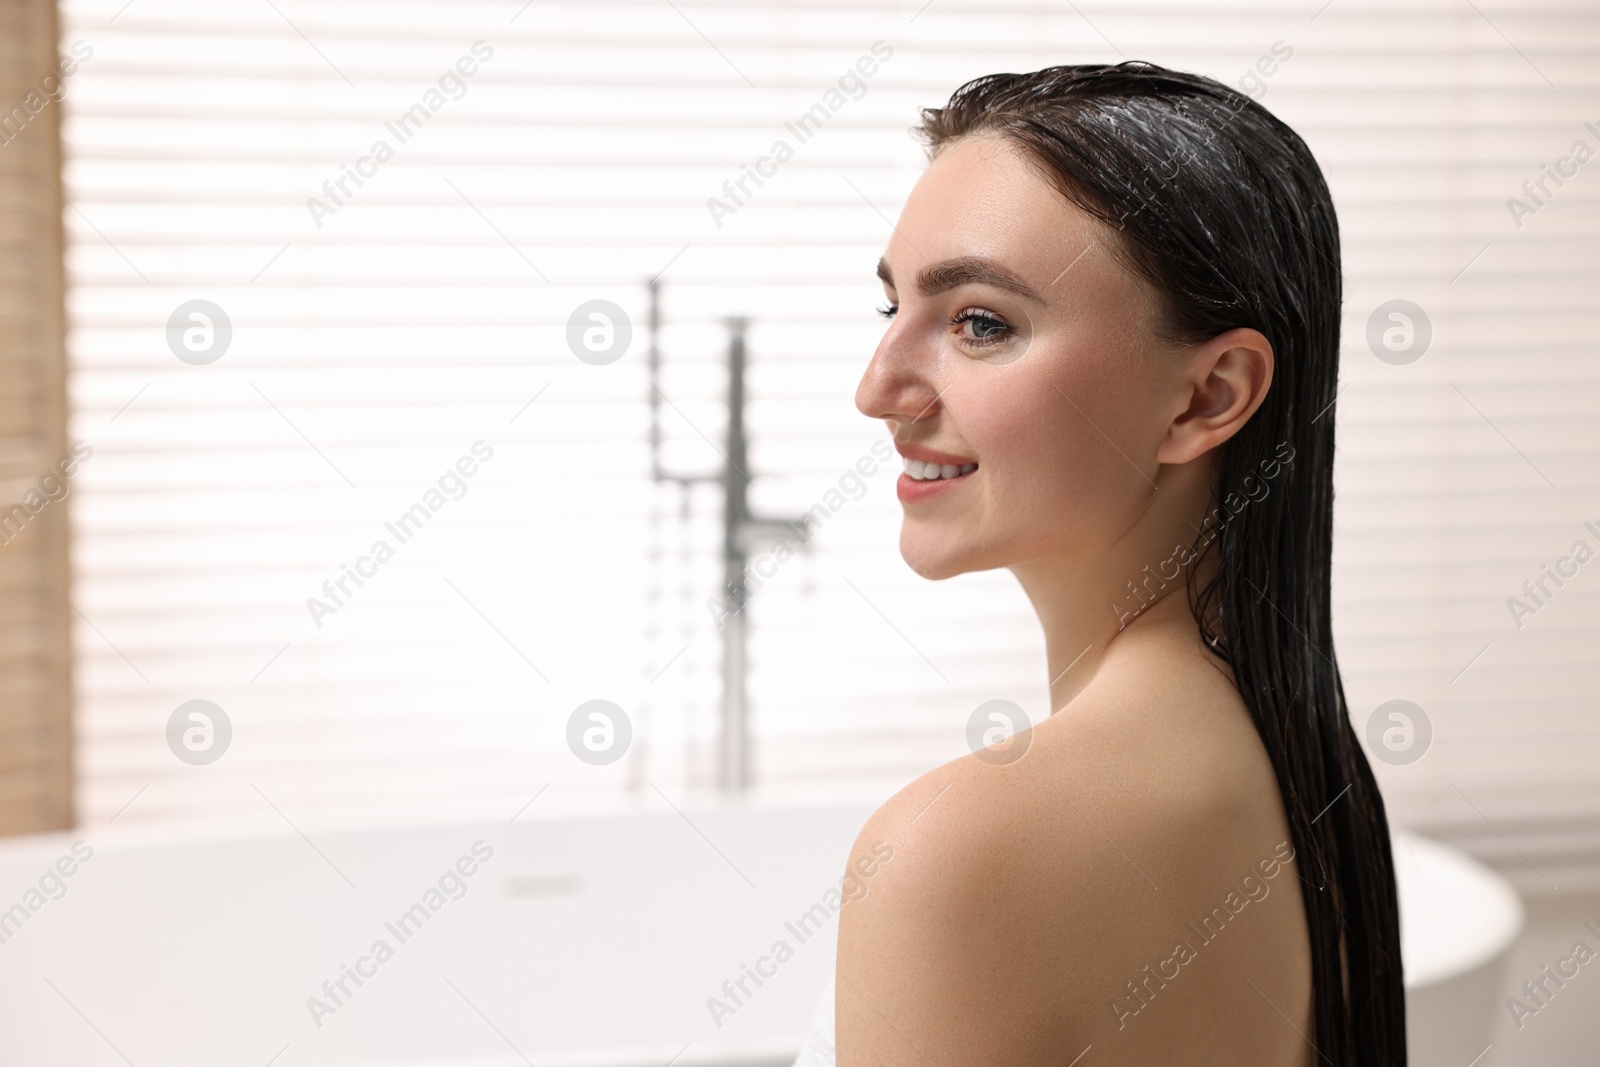 Photo of Smiling woman with applied hair mask in bathroom. Space for text